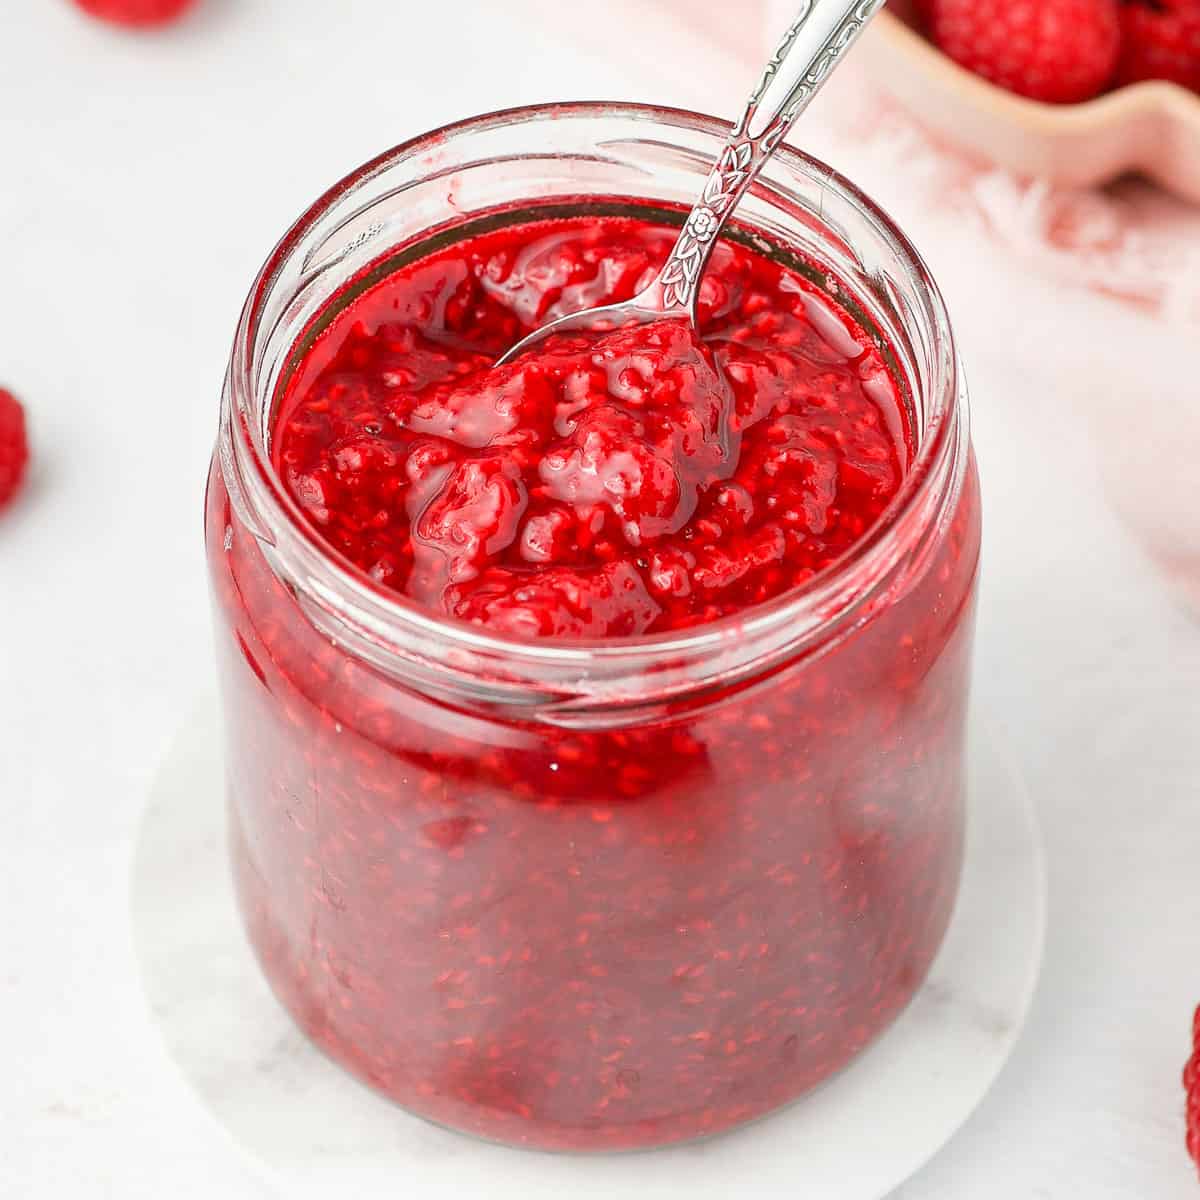 Spoon sticking out of the raspberry compote jar.